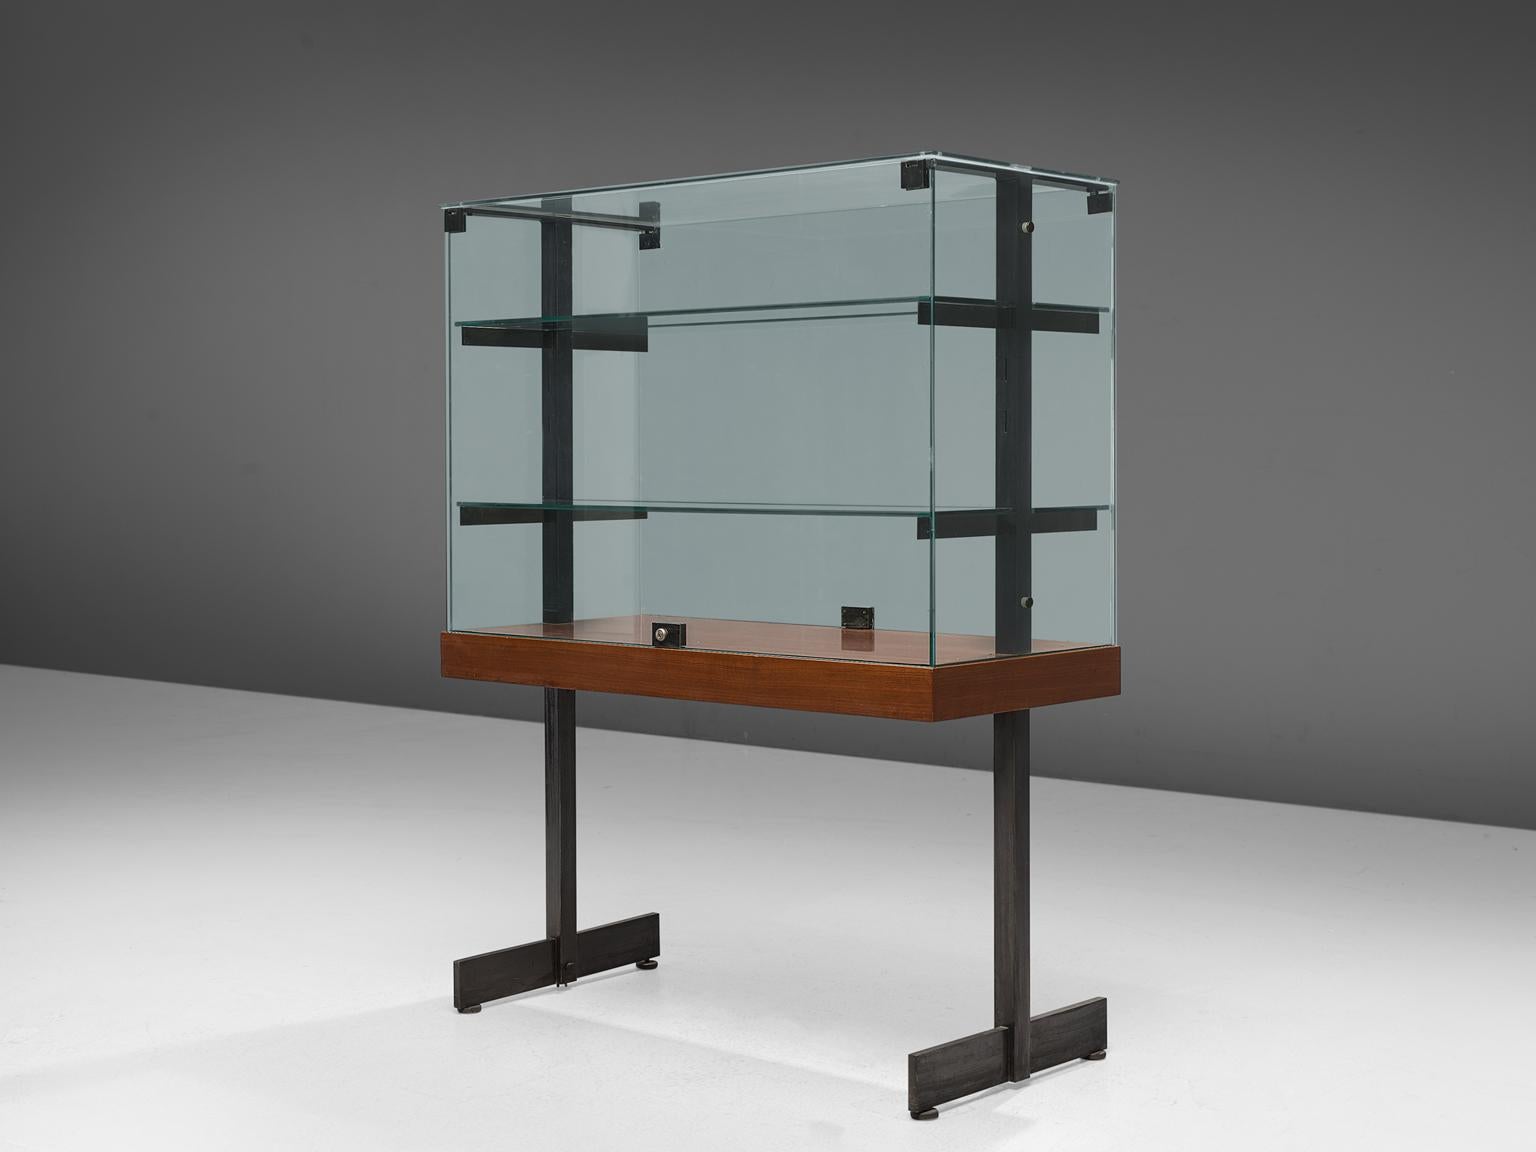 De Coene, vitrine, teak, steel and glass, Belgium, 1960s. 

Modernist showcases with two doors on the side all original glass and in good condition. Accompanied with steel and wood frames. The vitrine features the brutalist and muscular